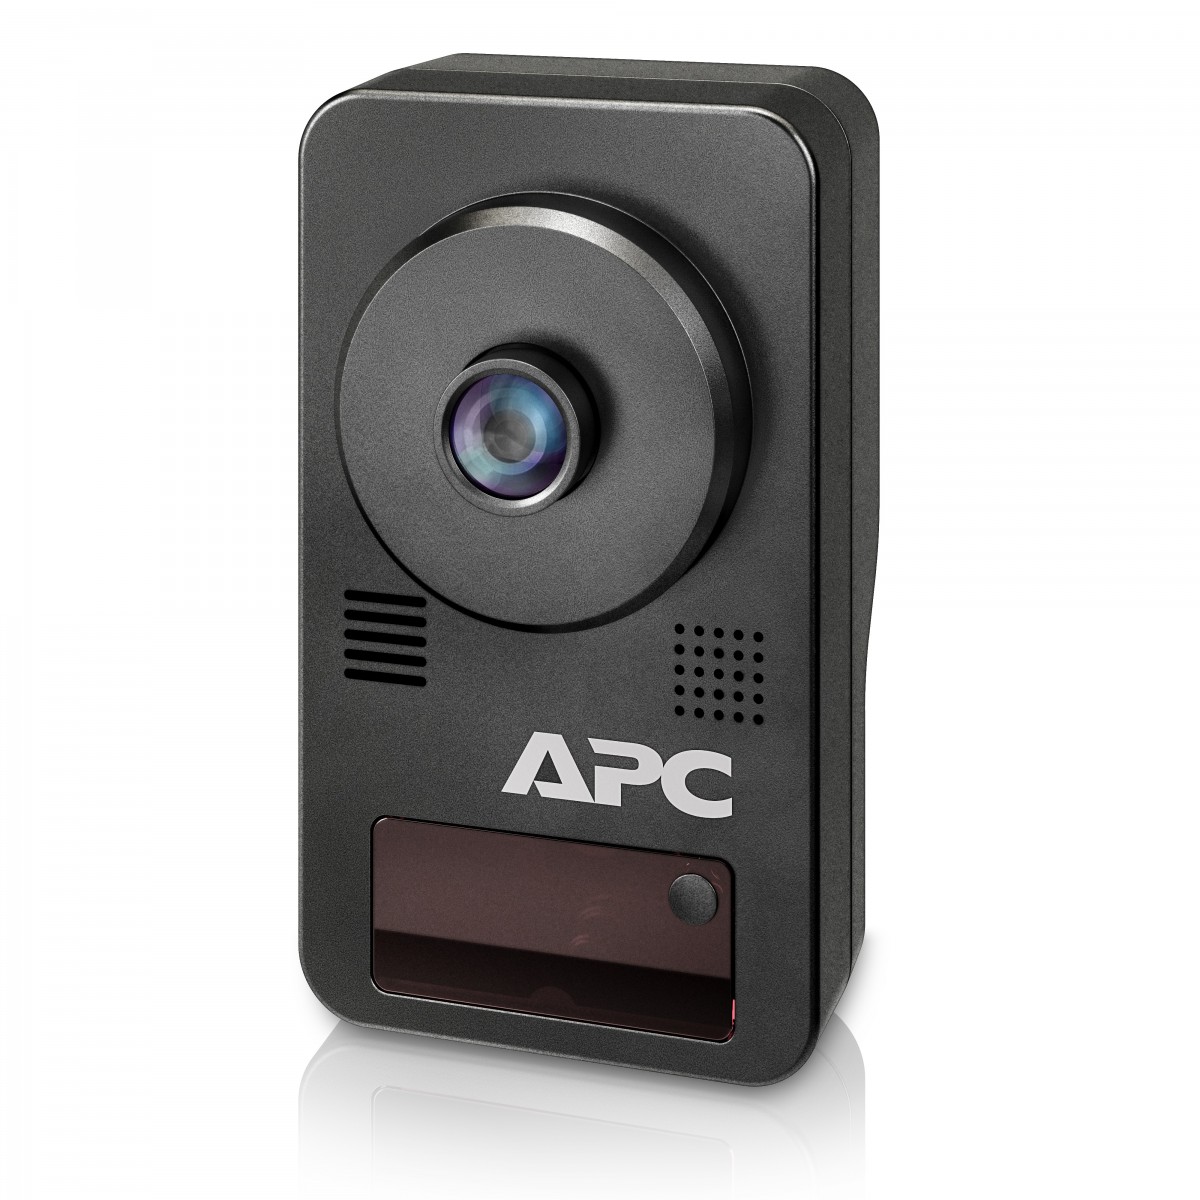 APC Pod 165 - IP security camera - Indoor  outdoor - Wired - CE FCC 47 CFR Part 15 Class A - ICES-003 Class A - AS-NZS CISPR 22 